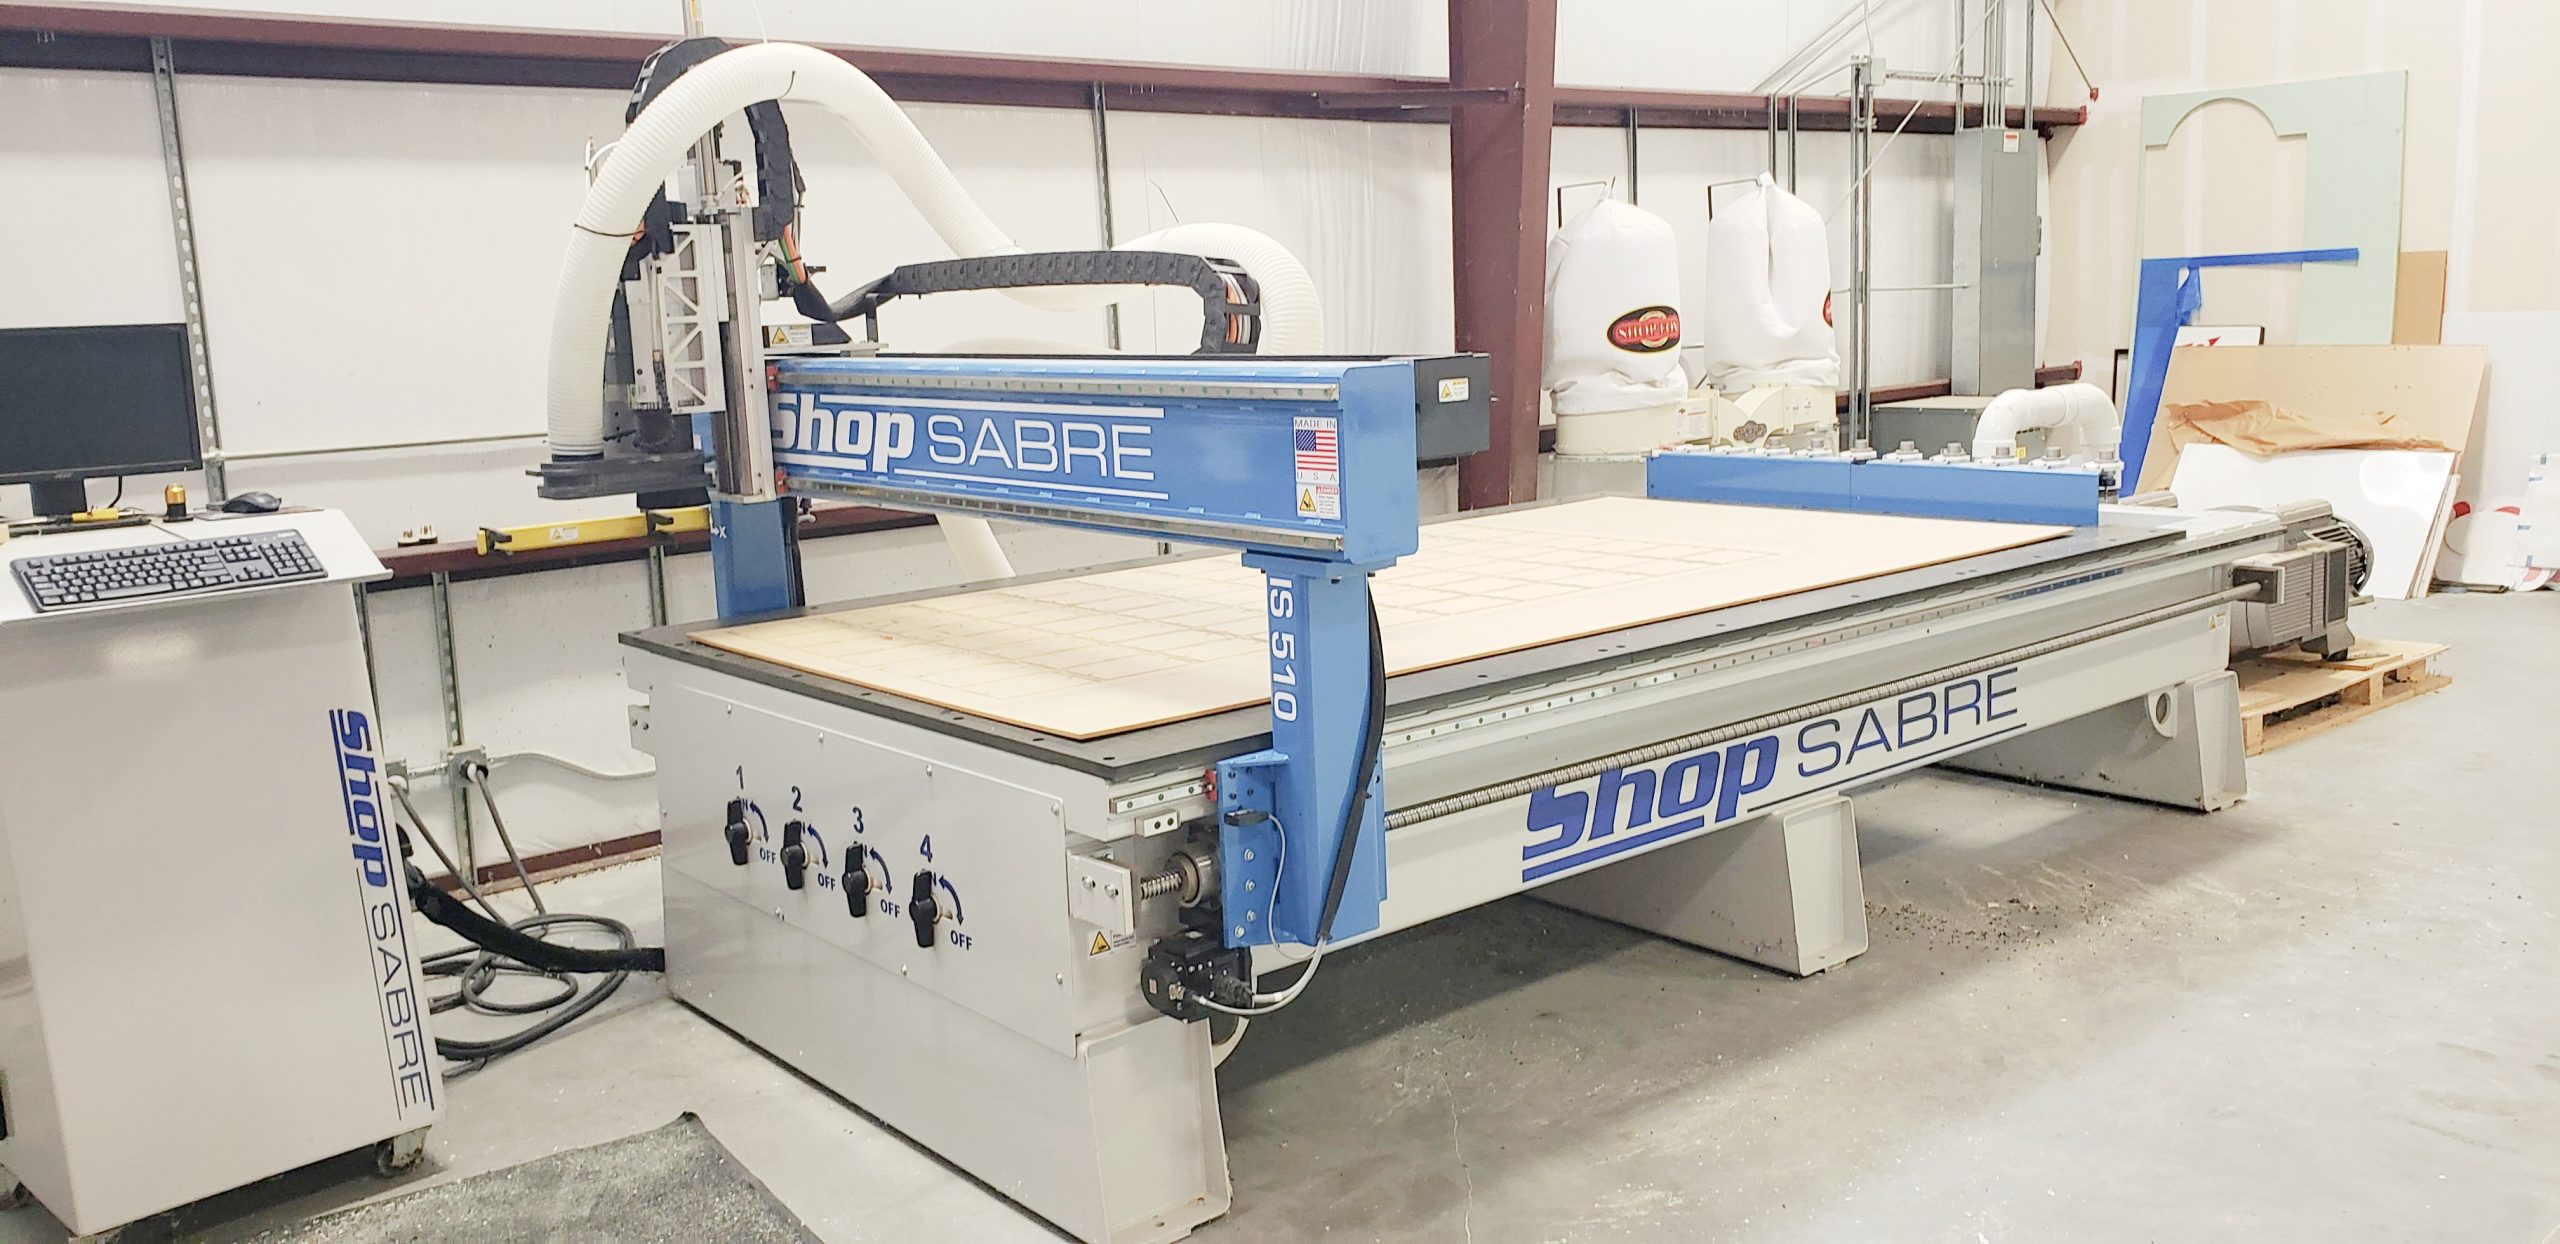 Shopsabre IS 510 CNC Router (Used) Item # UE-081221M (Arizona)